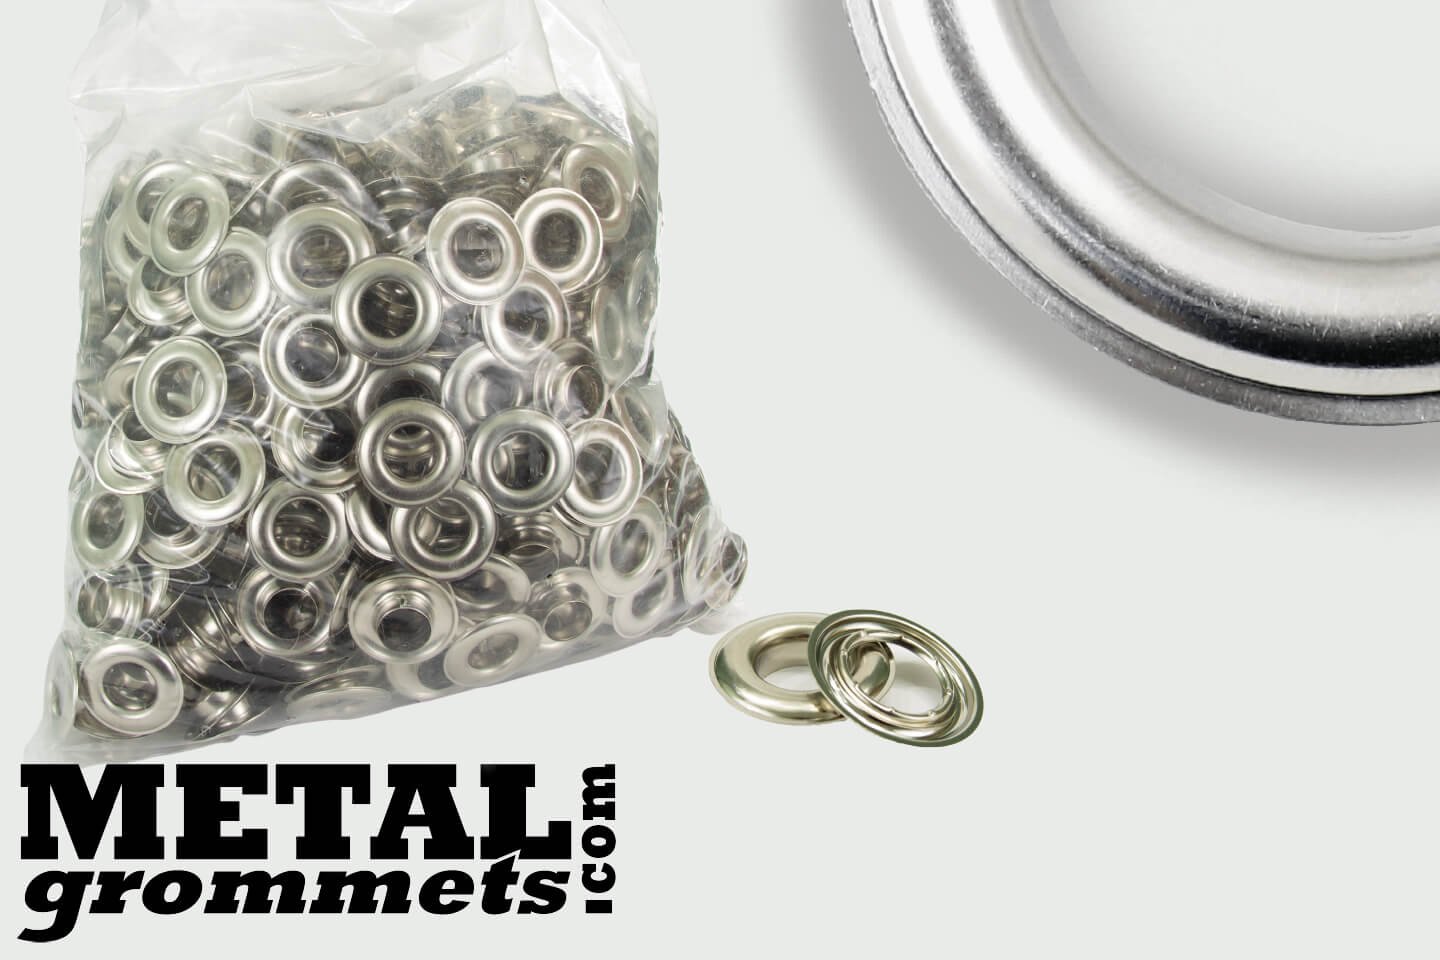 #4 (1/2 - 0.50 Hole Size) Nickel plated grommets & washers